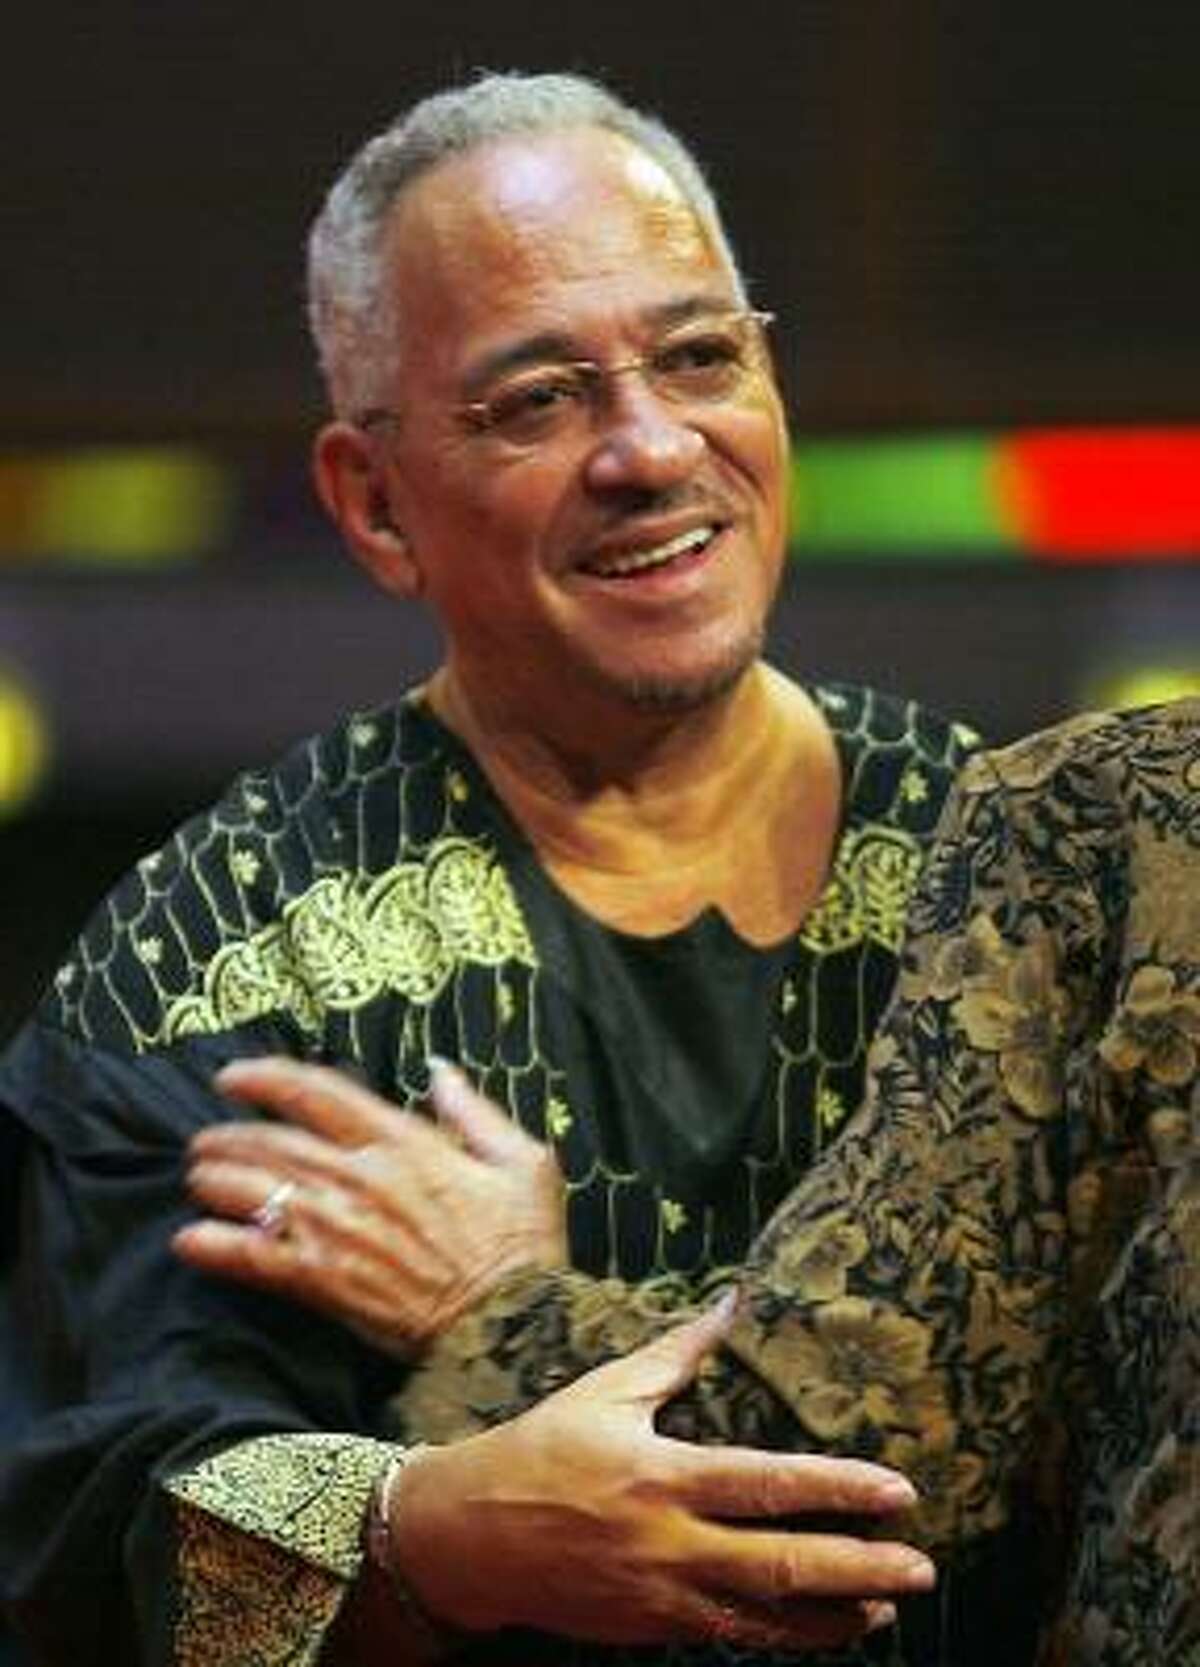 The Rev. Jeremiah Wright, shown in Chicago in a 2006 file photo, has generated much criticism for his inflammatory remarks about the United States.